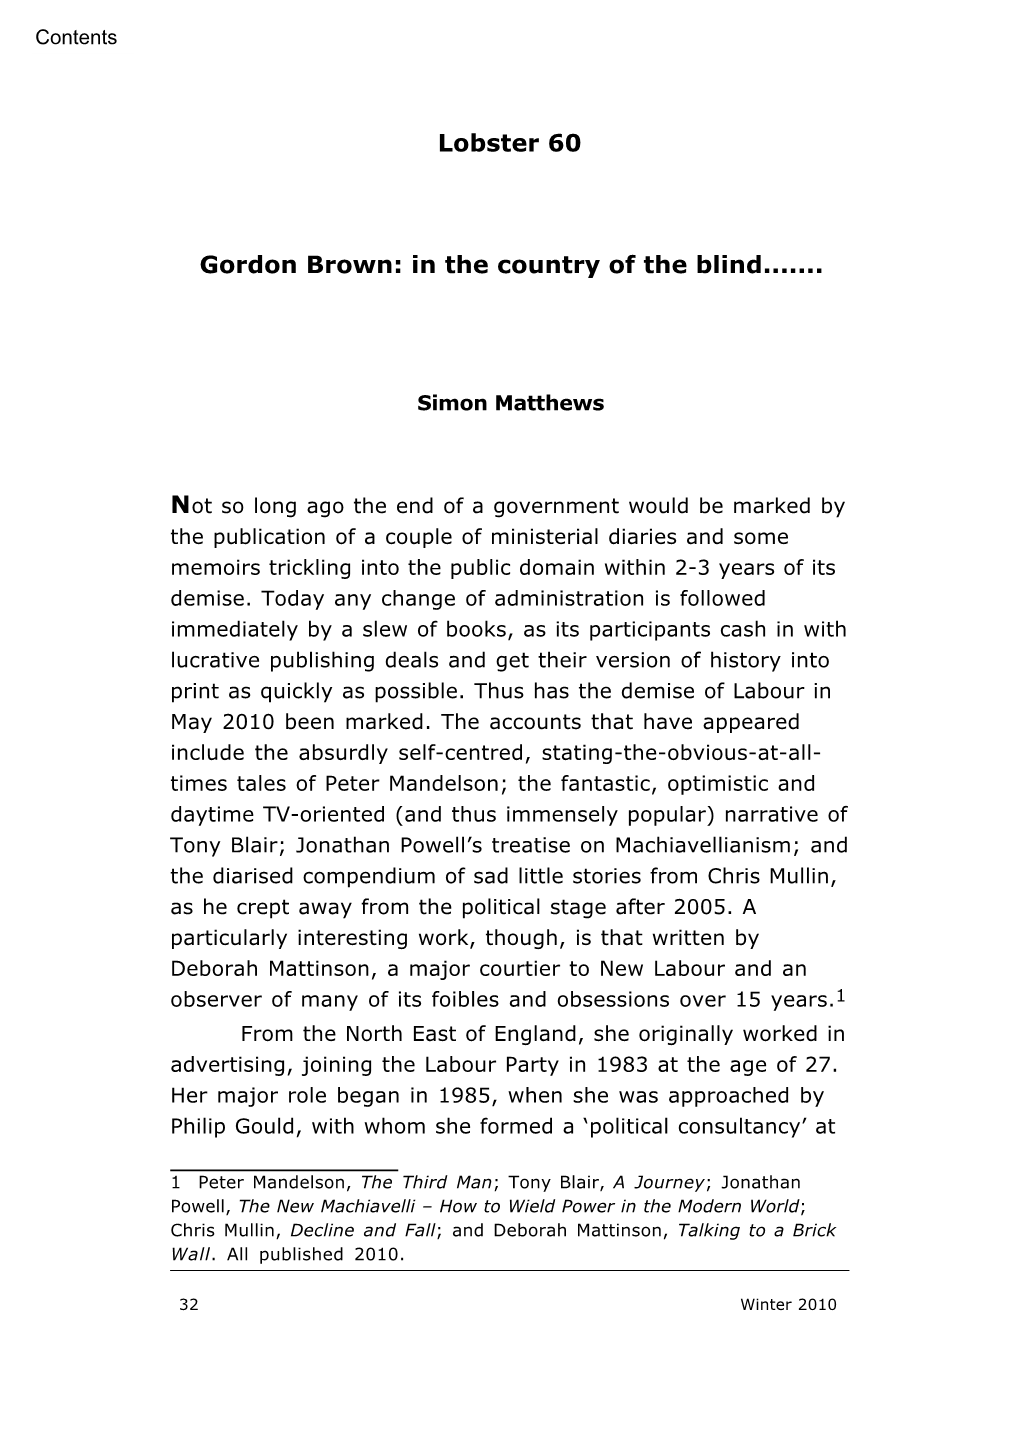 Gordon Brown: in the Country of the Blind